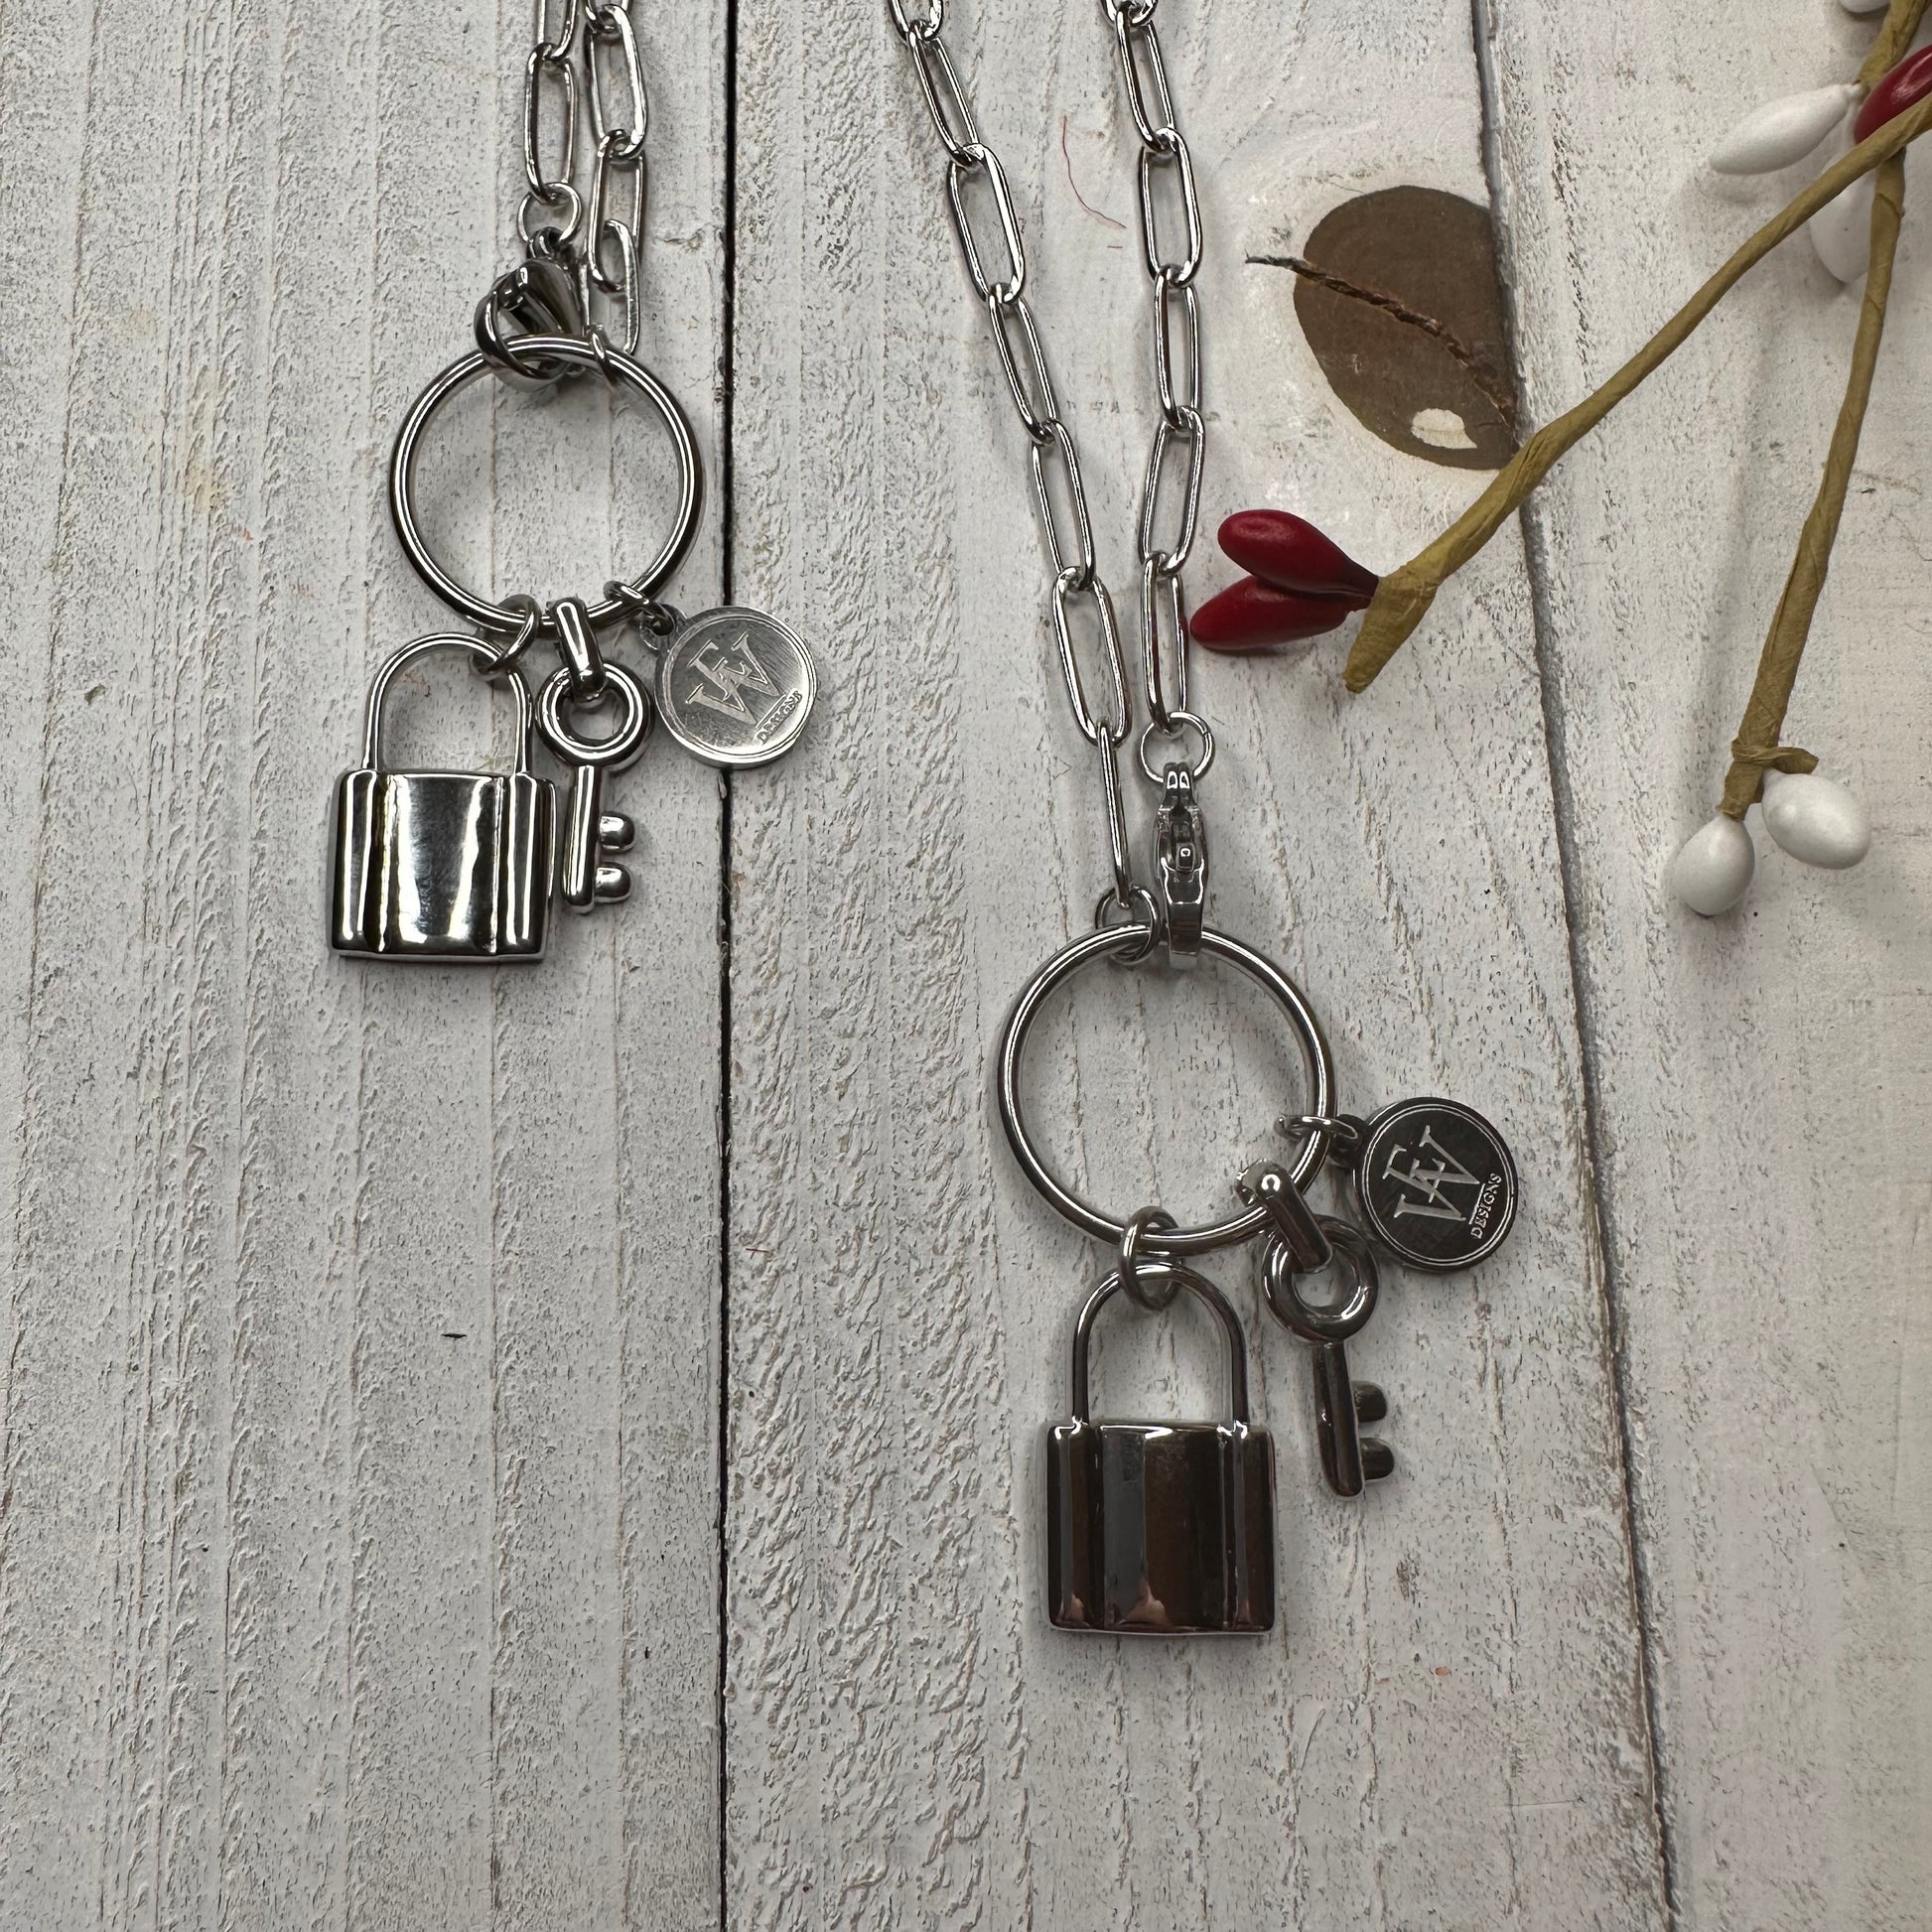 Necklace with a Lock and Key as Charms